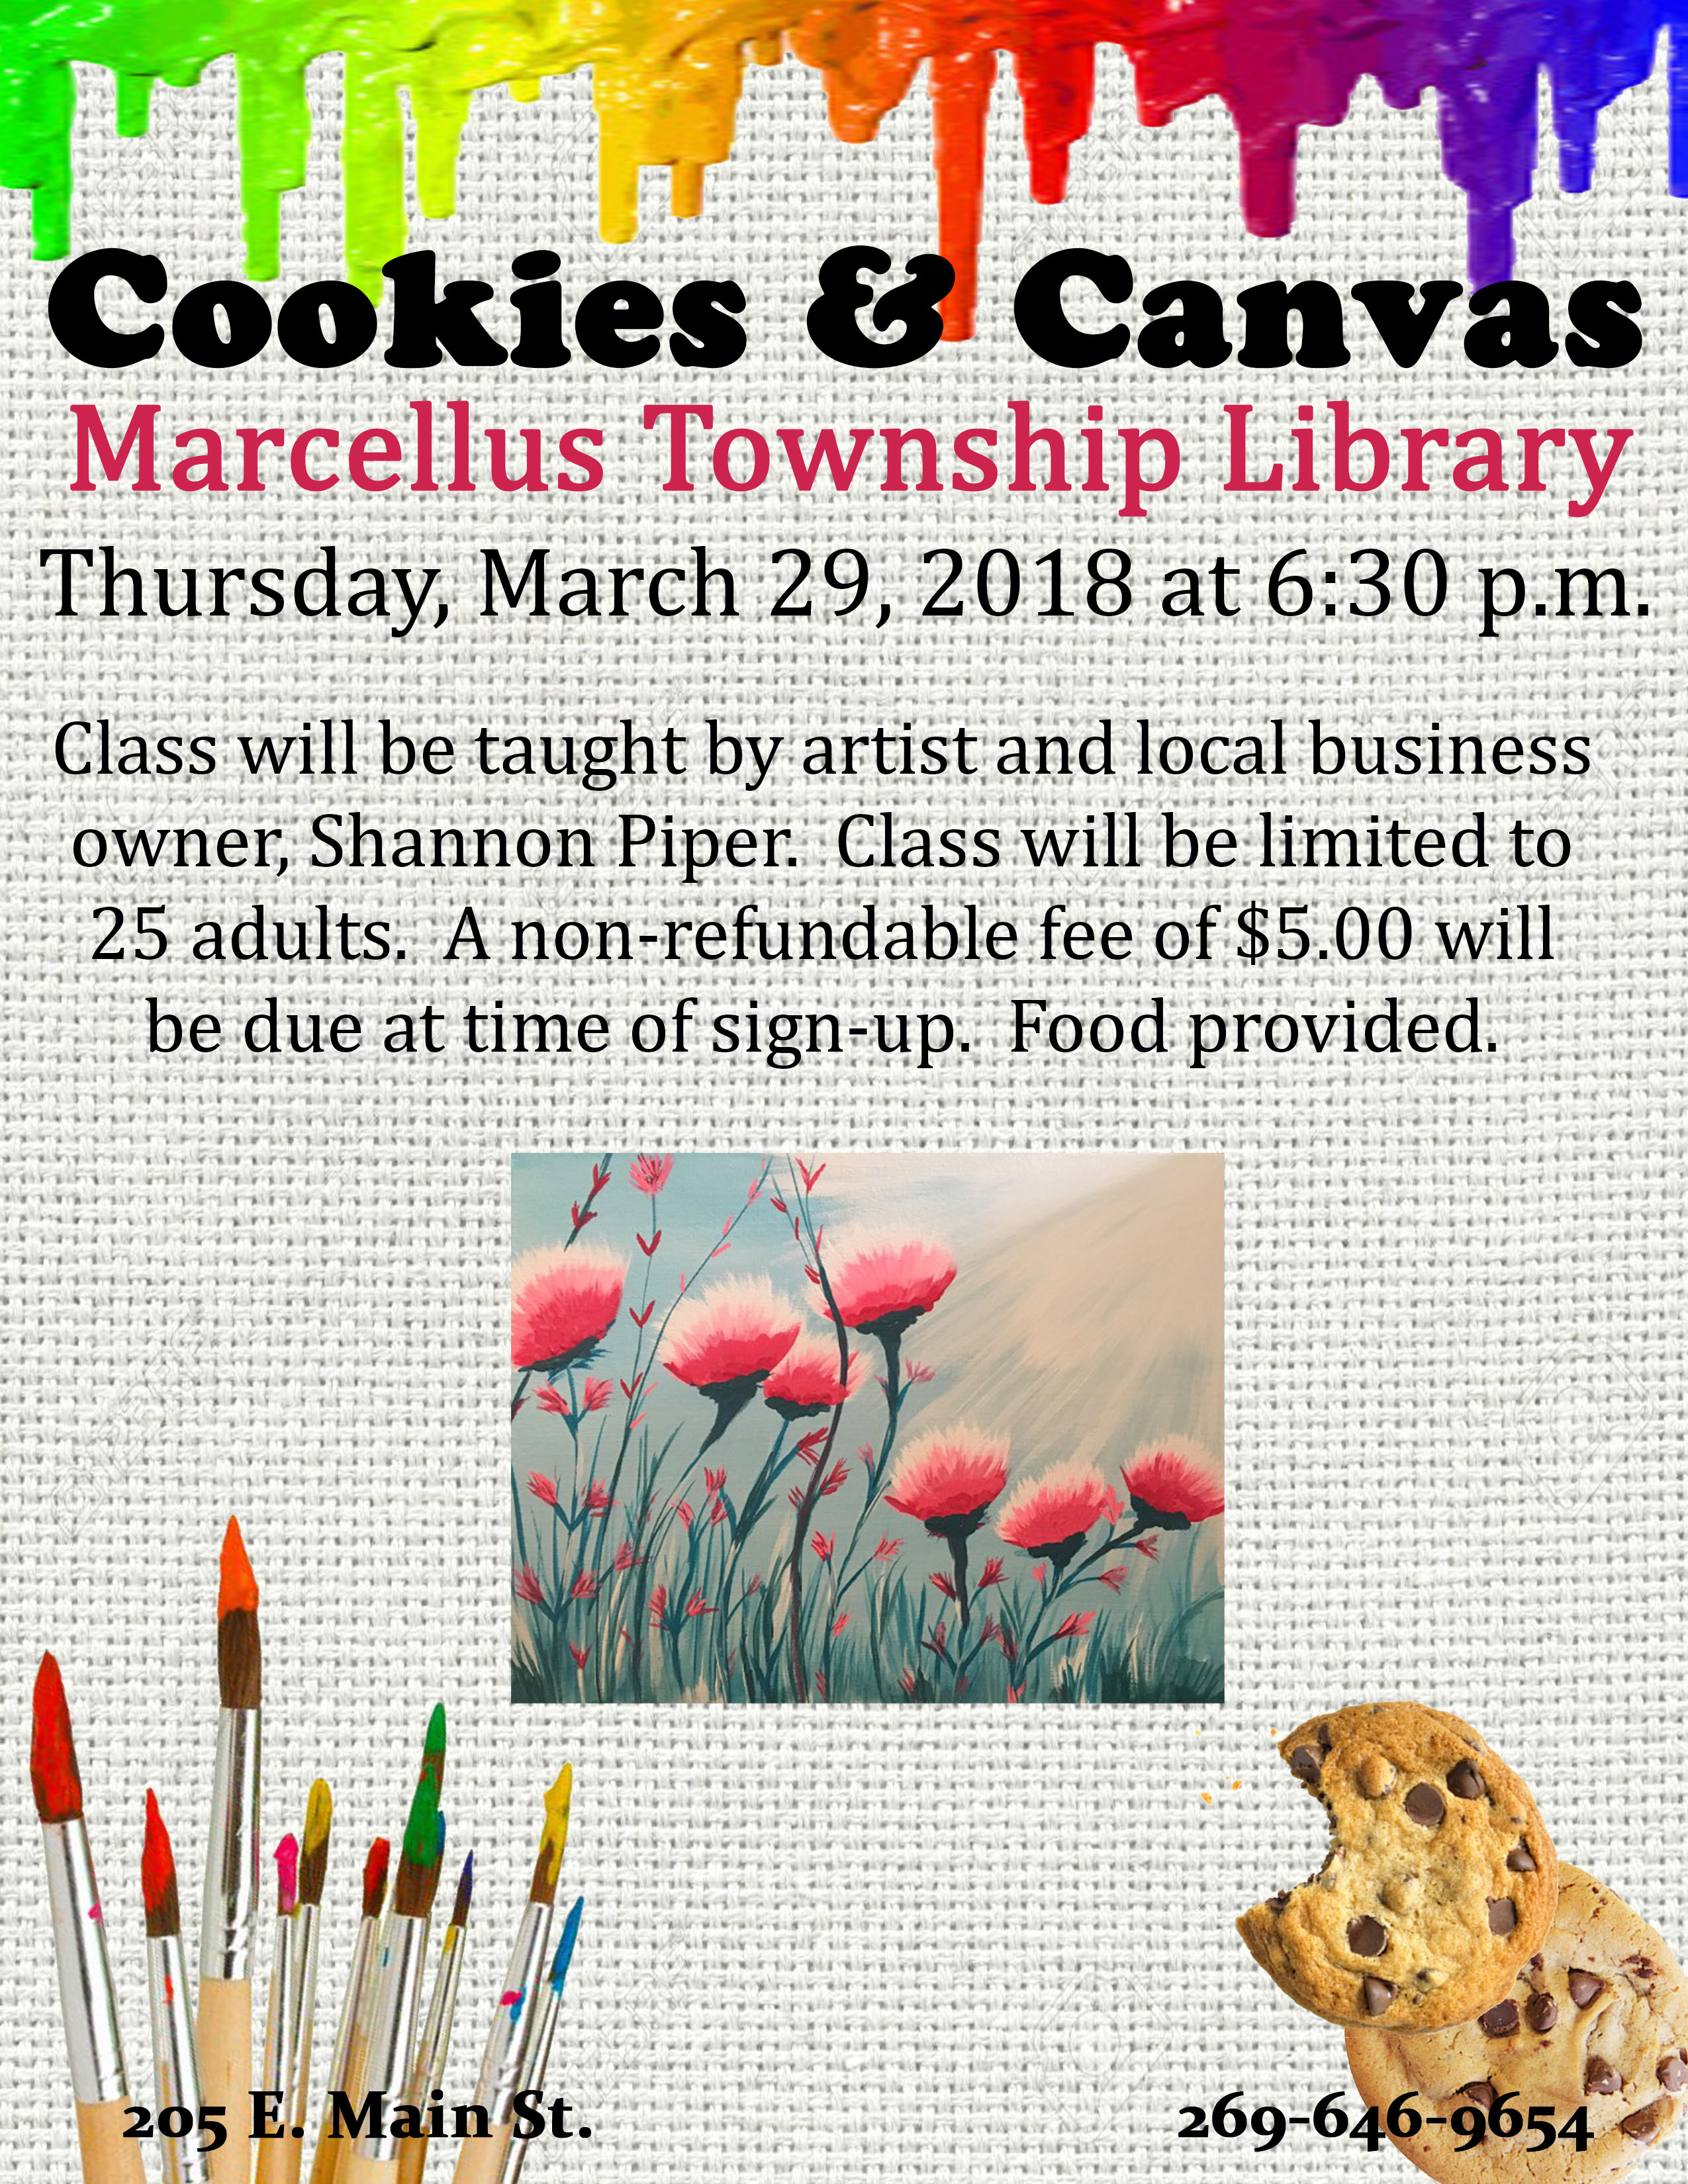 Cookies and canvas 2018.jpg